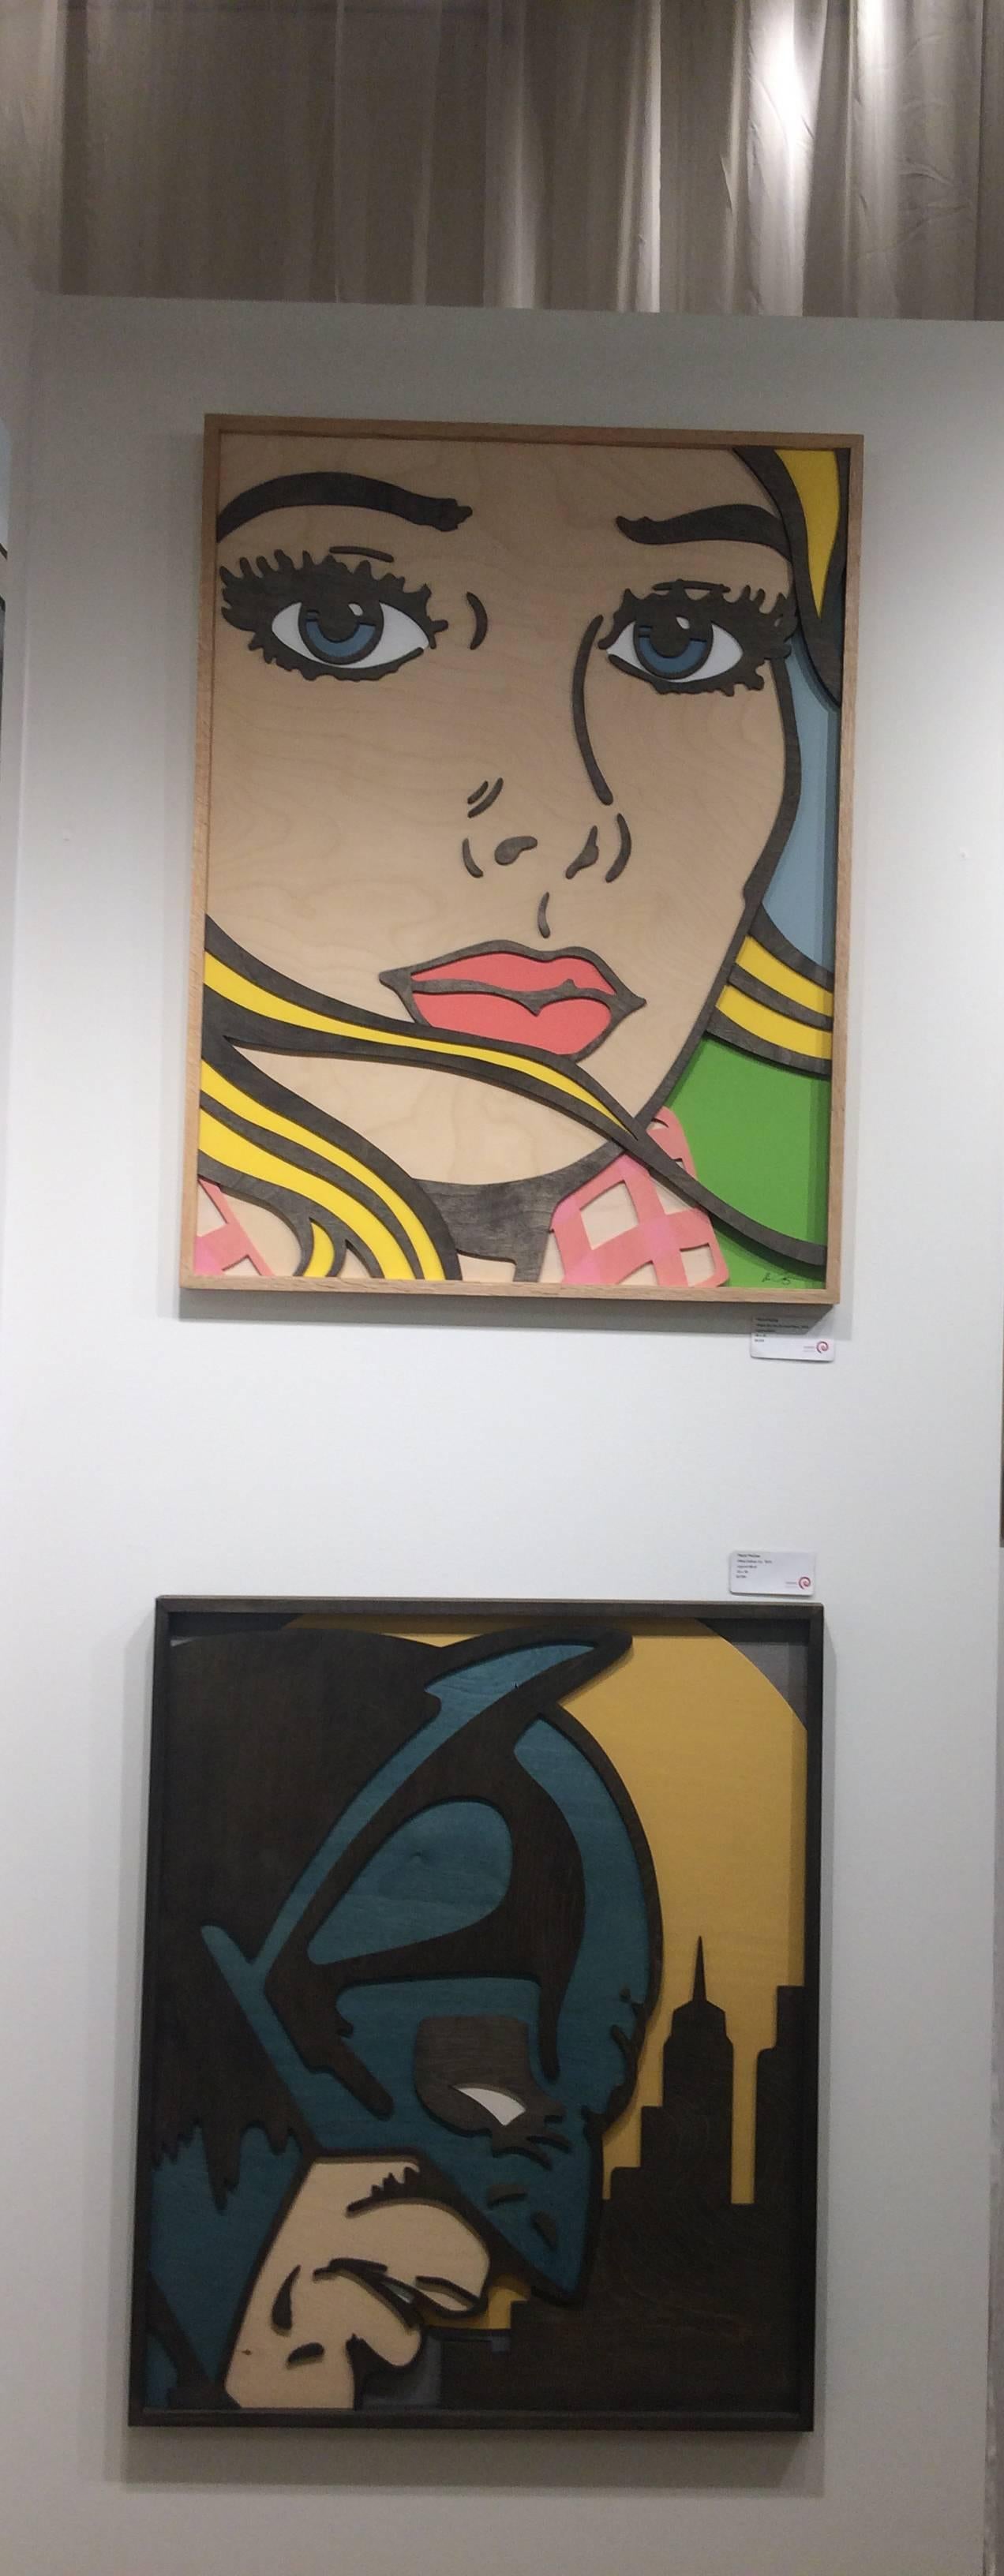 The influences for McGee's own artwork came from the style of Pop Art legend, Roy Lichtenstein.  According to McGee, 